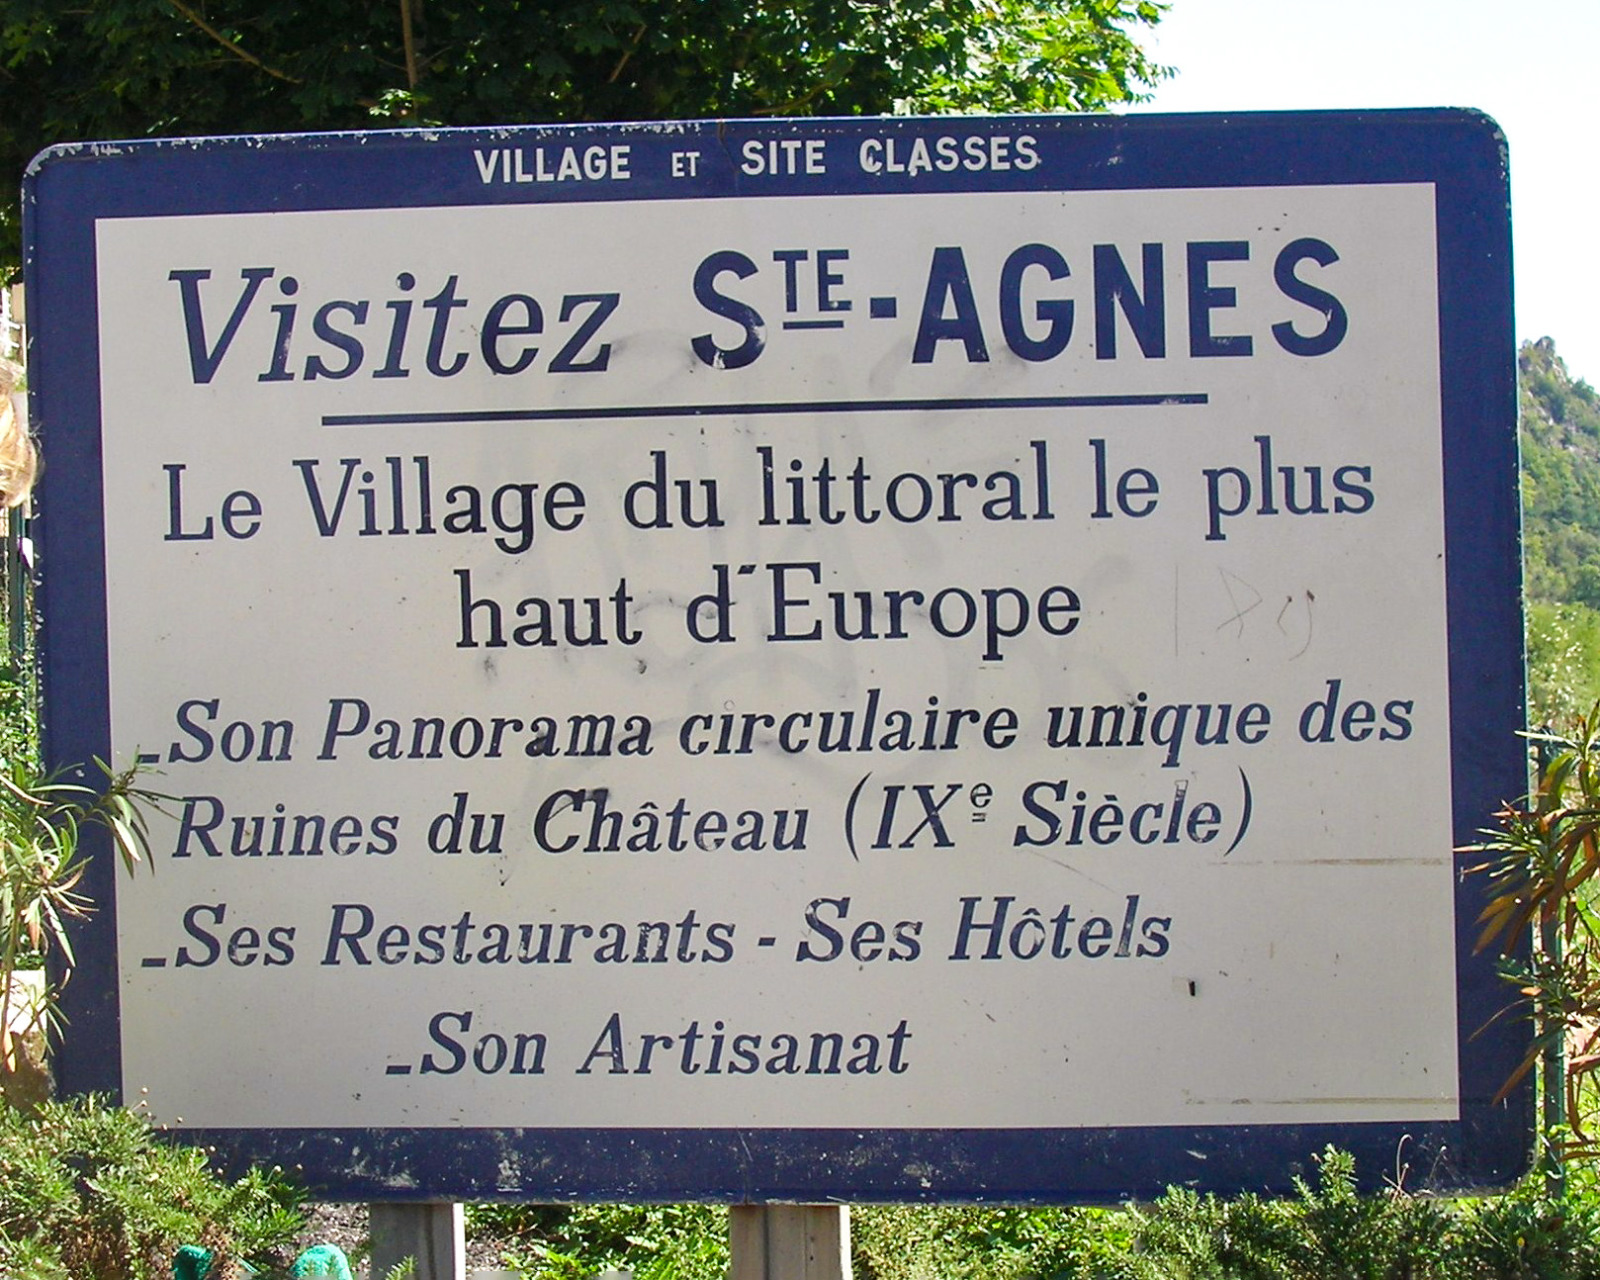 Welcome to Saint-Agnès! © Pmk58 - licence [CC BY-SA 3.0] from Wikimedia Commons